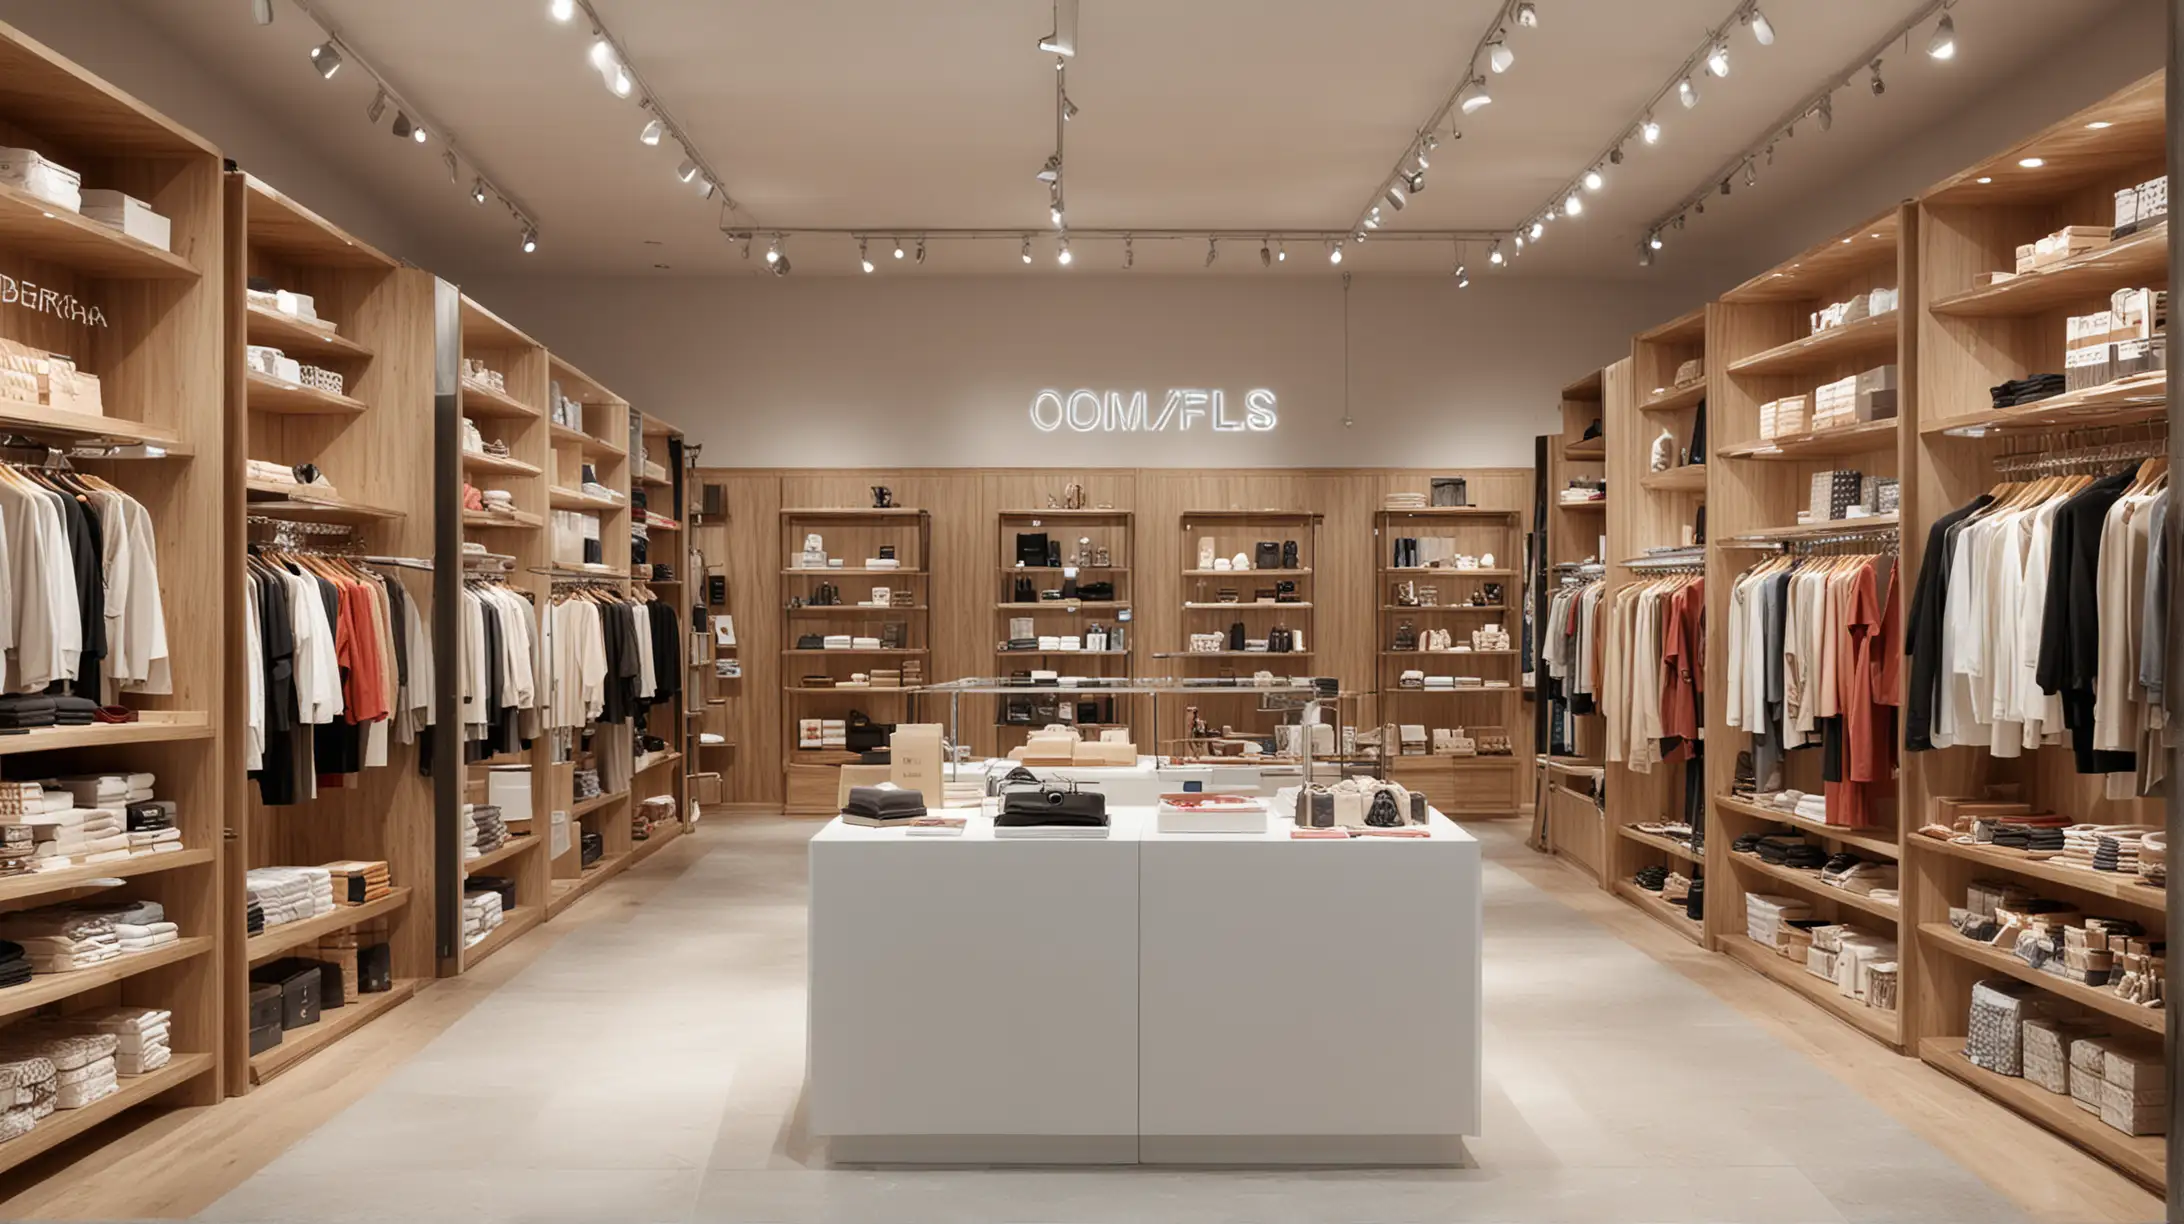 Modern Retail Shop Design with Sleek Shelving and Vibrant Displays